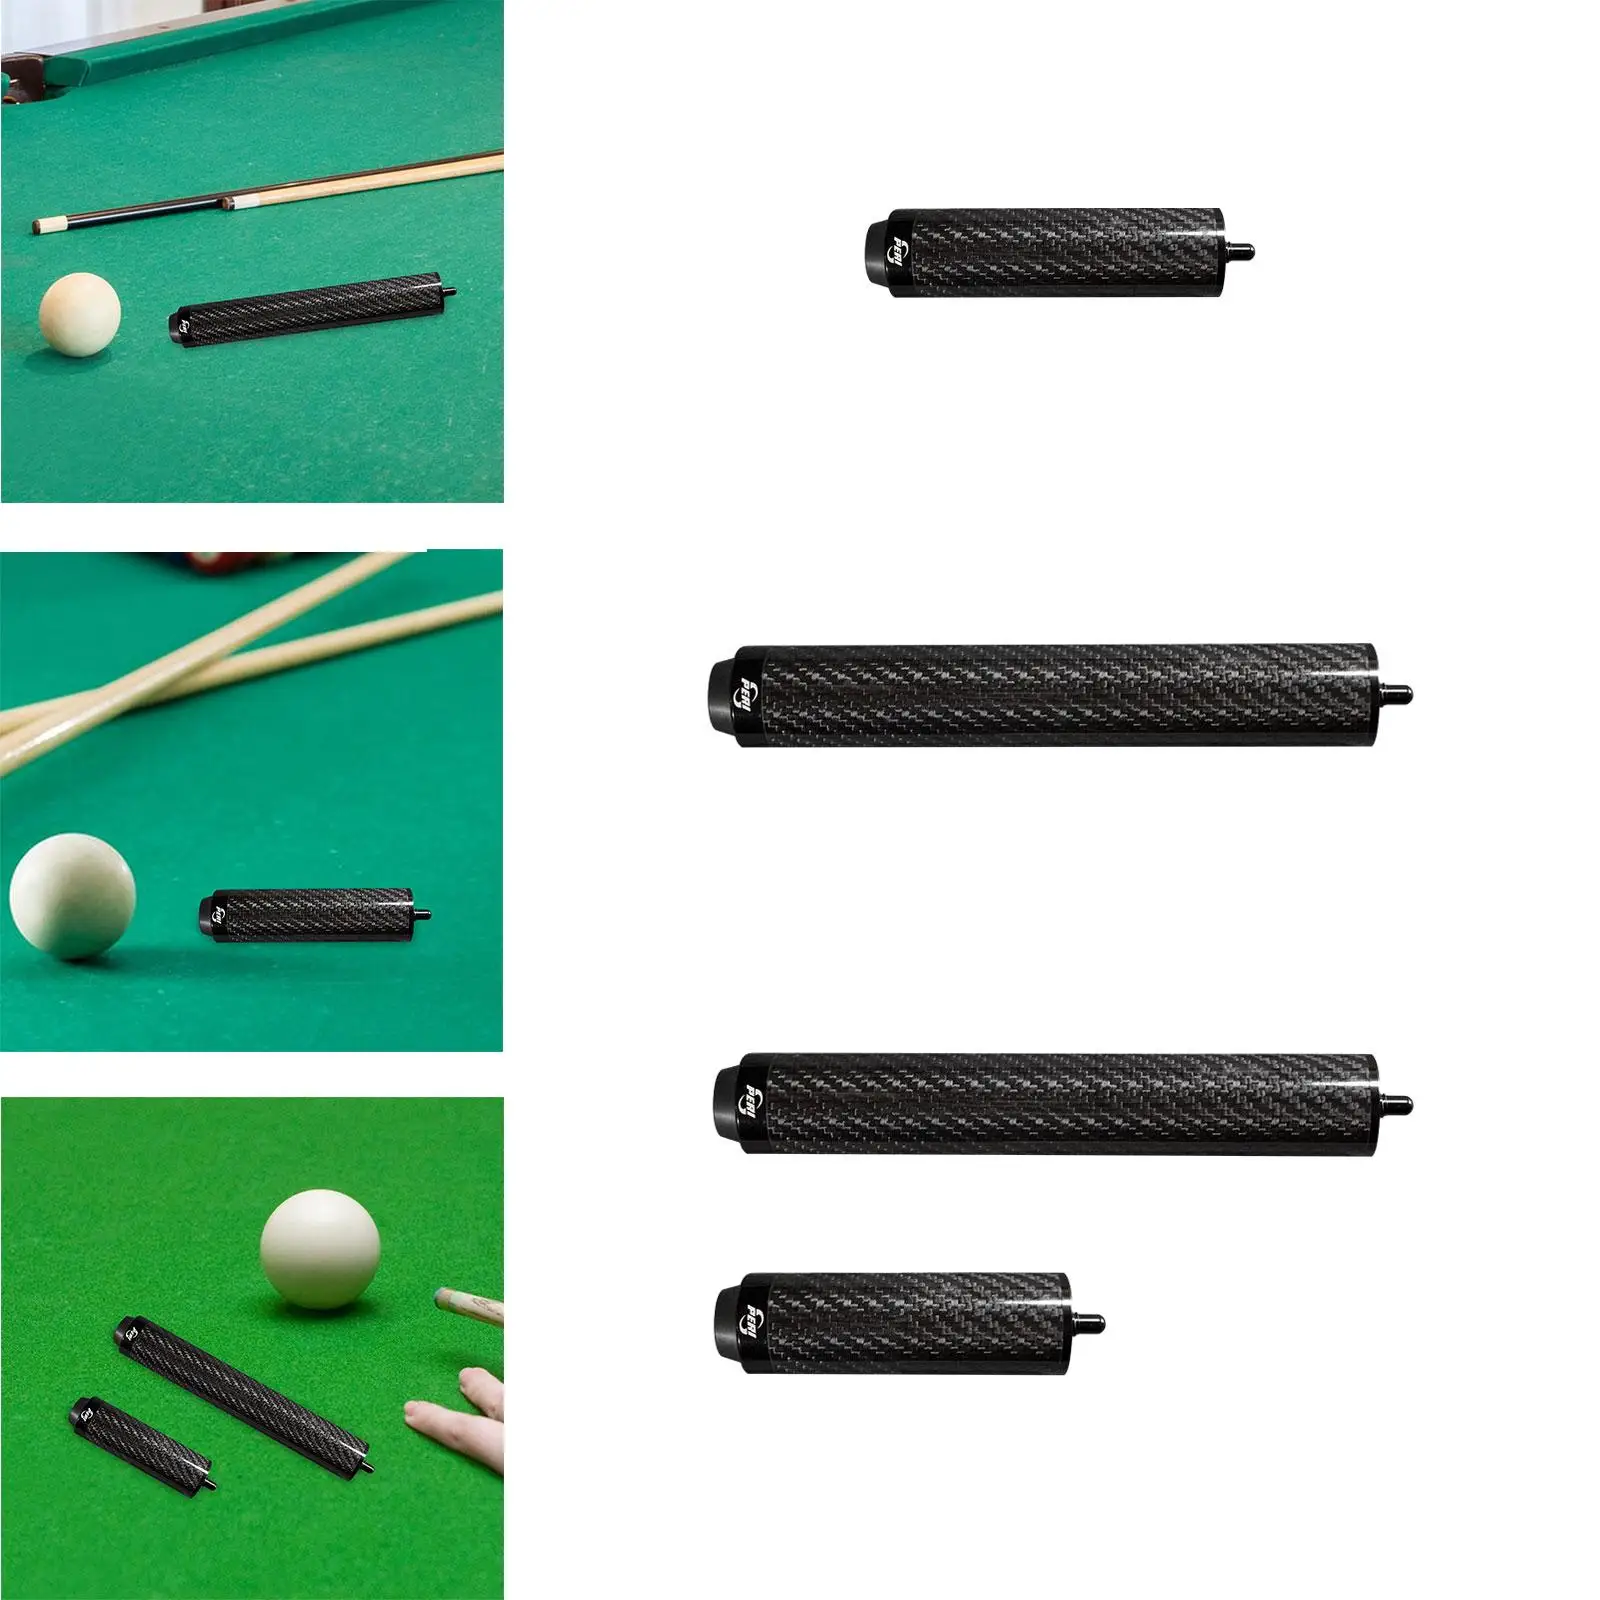 Billiards Pool Cue Extension Beginners Compact Athlete Cue Stick Extender